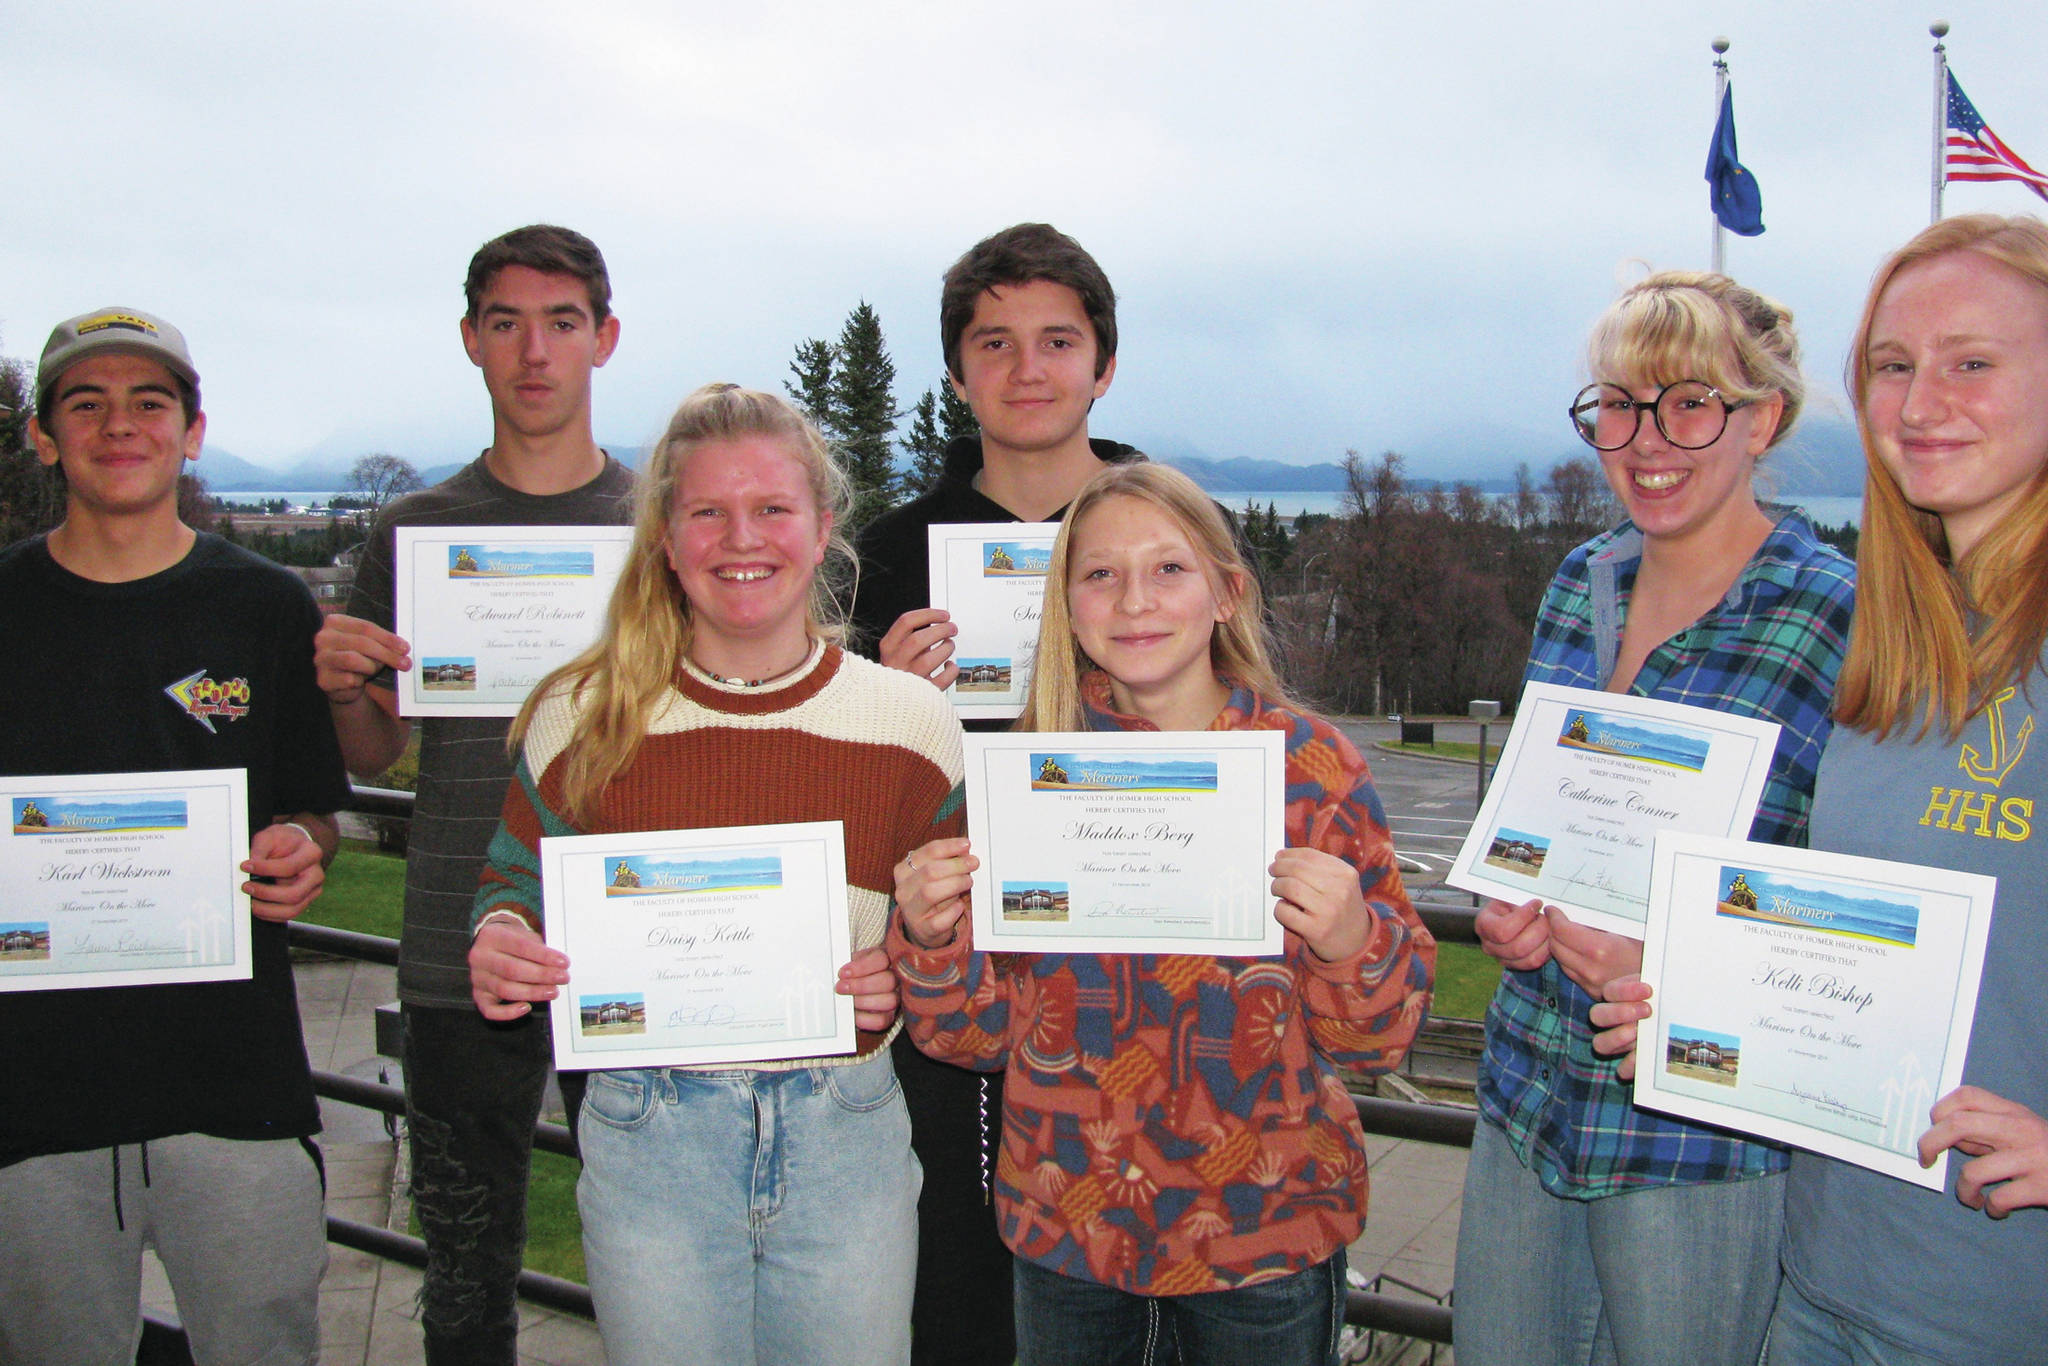 From left to right: Karl Wickstrom, Eddie Robinett, Daisy Kettle, Sam Cary, Maddox Berg, Catherine Conner and Kelli Bishop pose for a photo after being awarded this quarter’s Mariners on the Move in this undated photo at Homer High School in Homer, Alaska. Not pictured: Skyler Rodriguez. (Photo courtesy Paul Story)